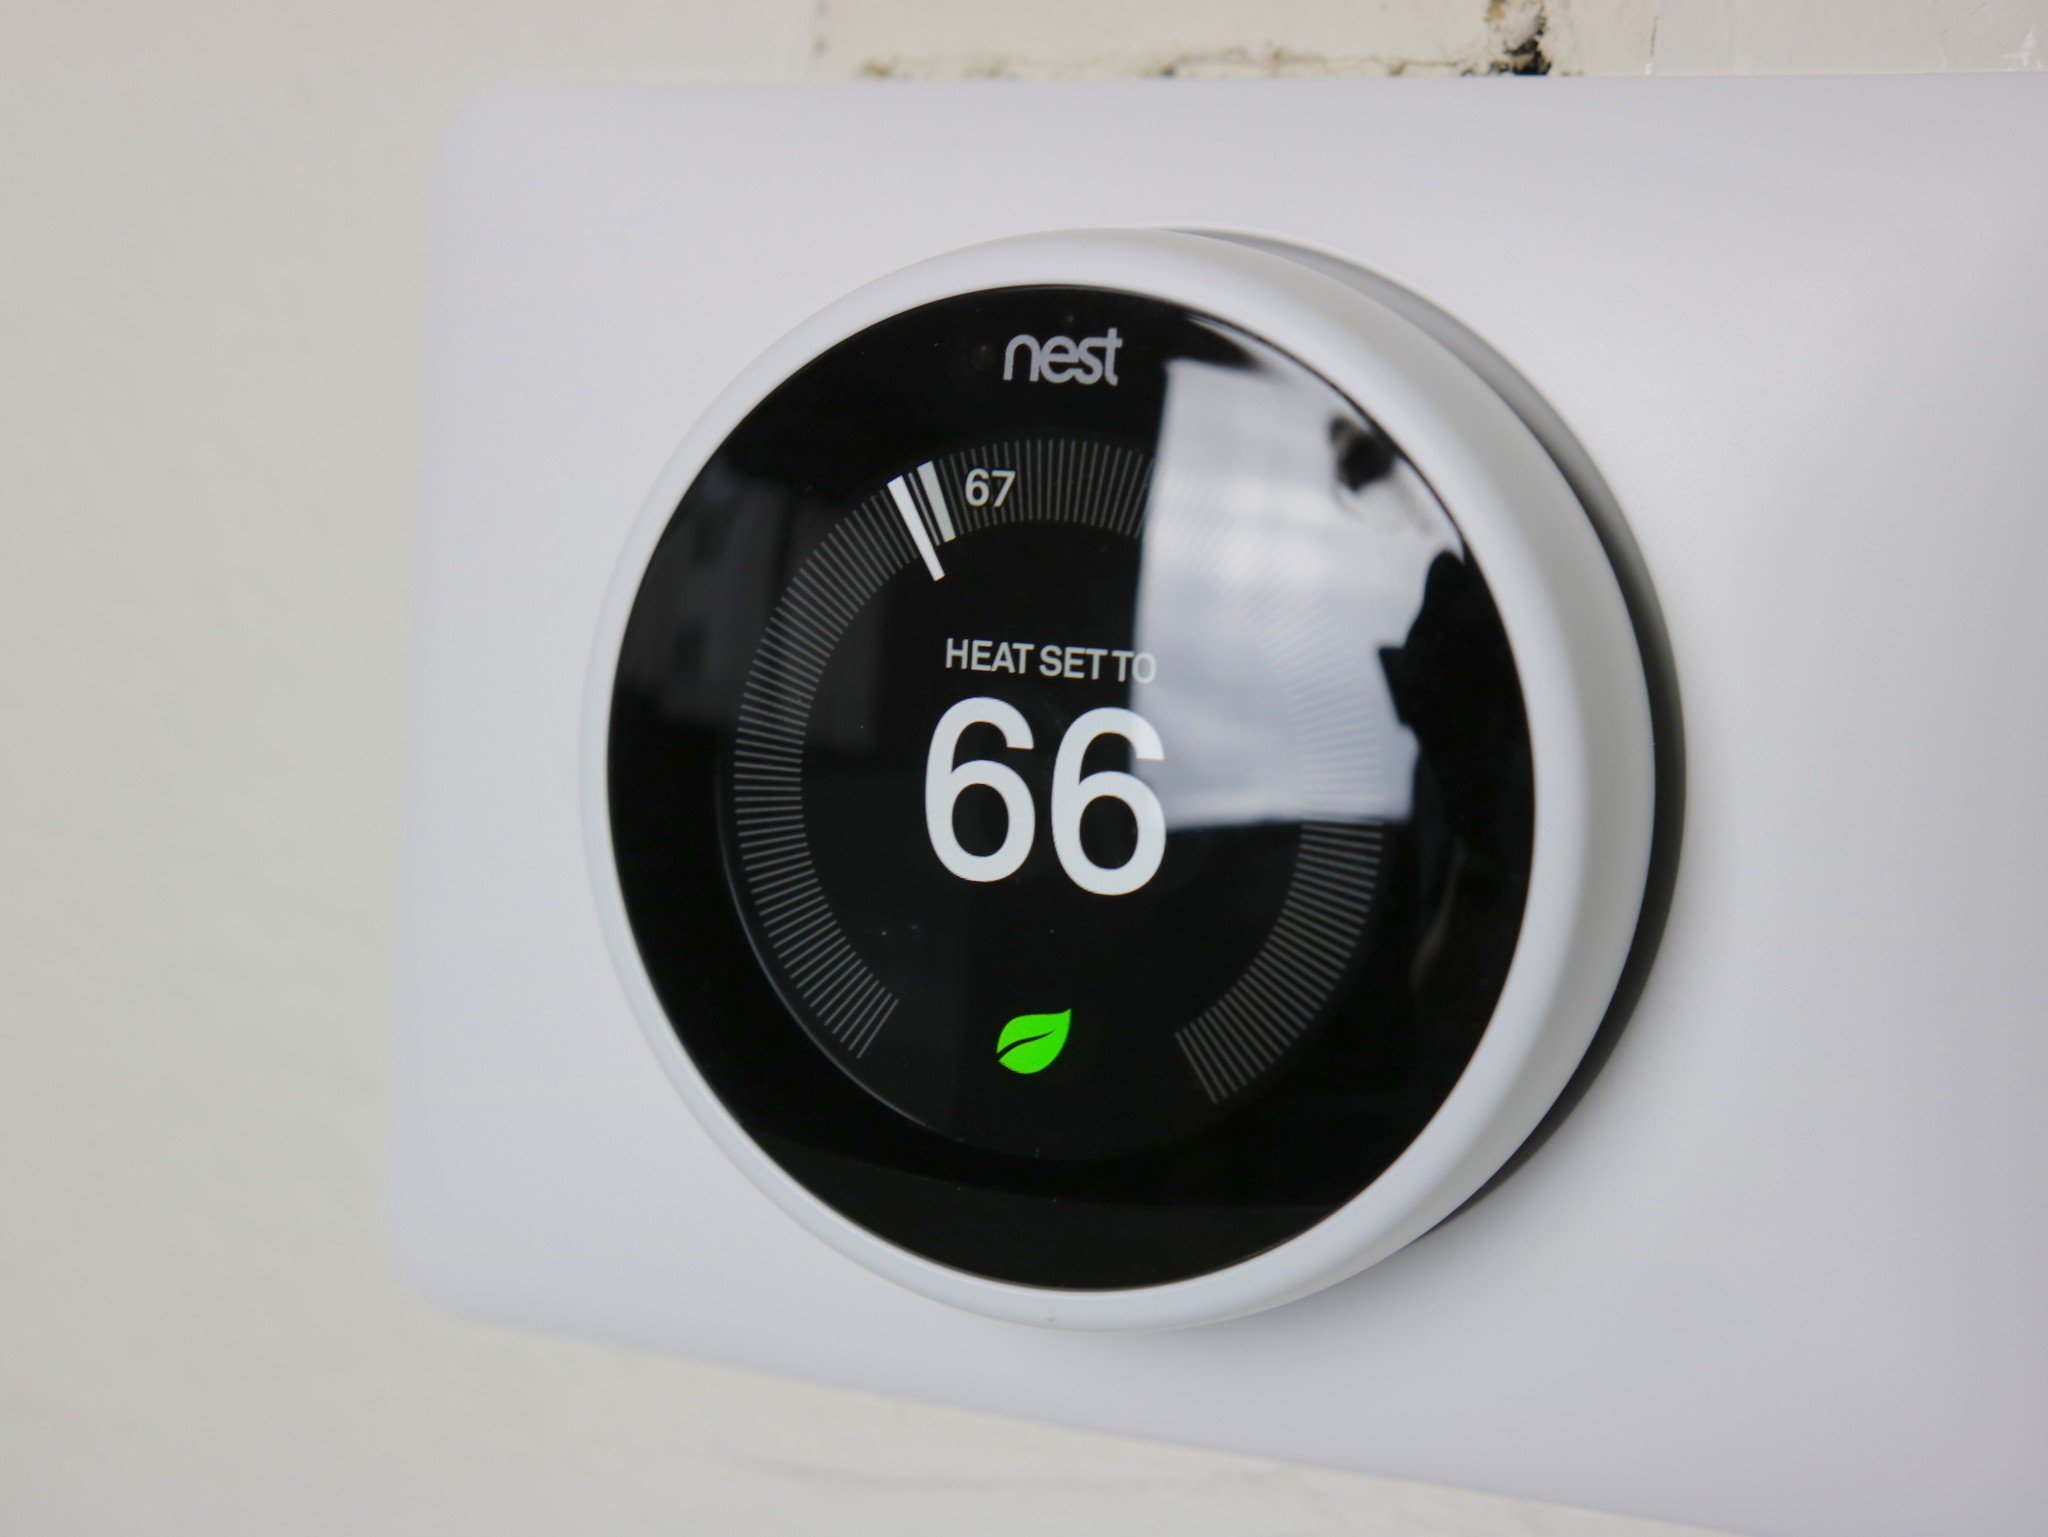 Give mental sød smag What are Eco Temperatures on a Nest Thermostat? | Android Central